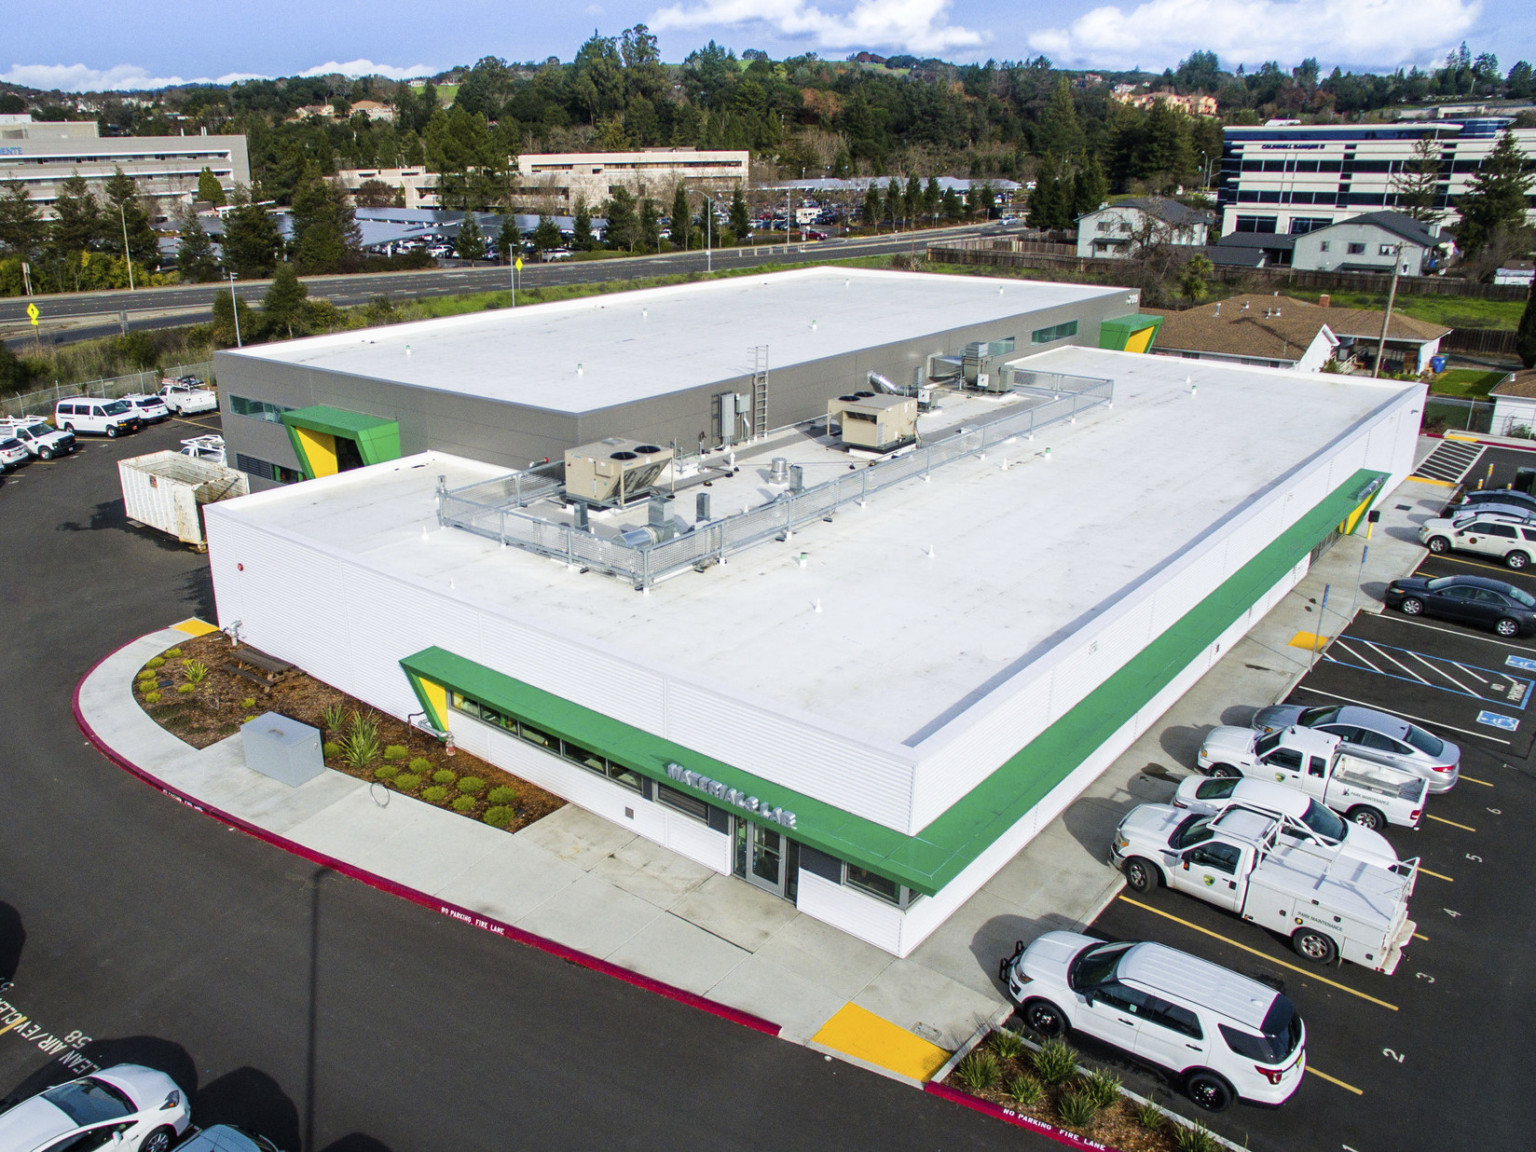 Aerial view of white rooftop on building with green and yellow awnings around entrances. Ducts and air conditioning on roof